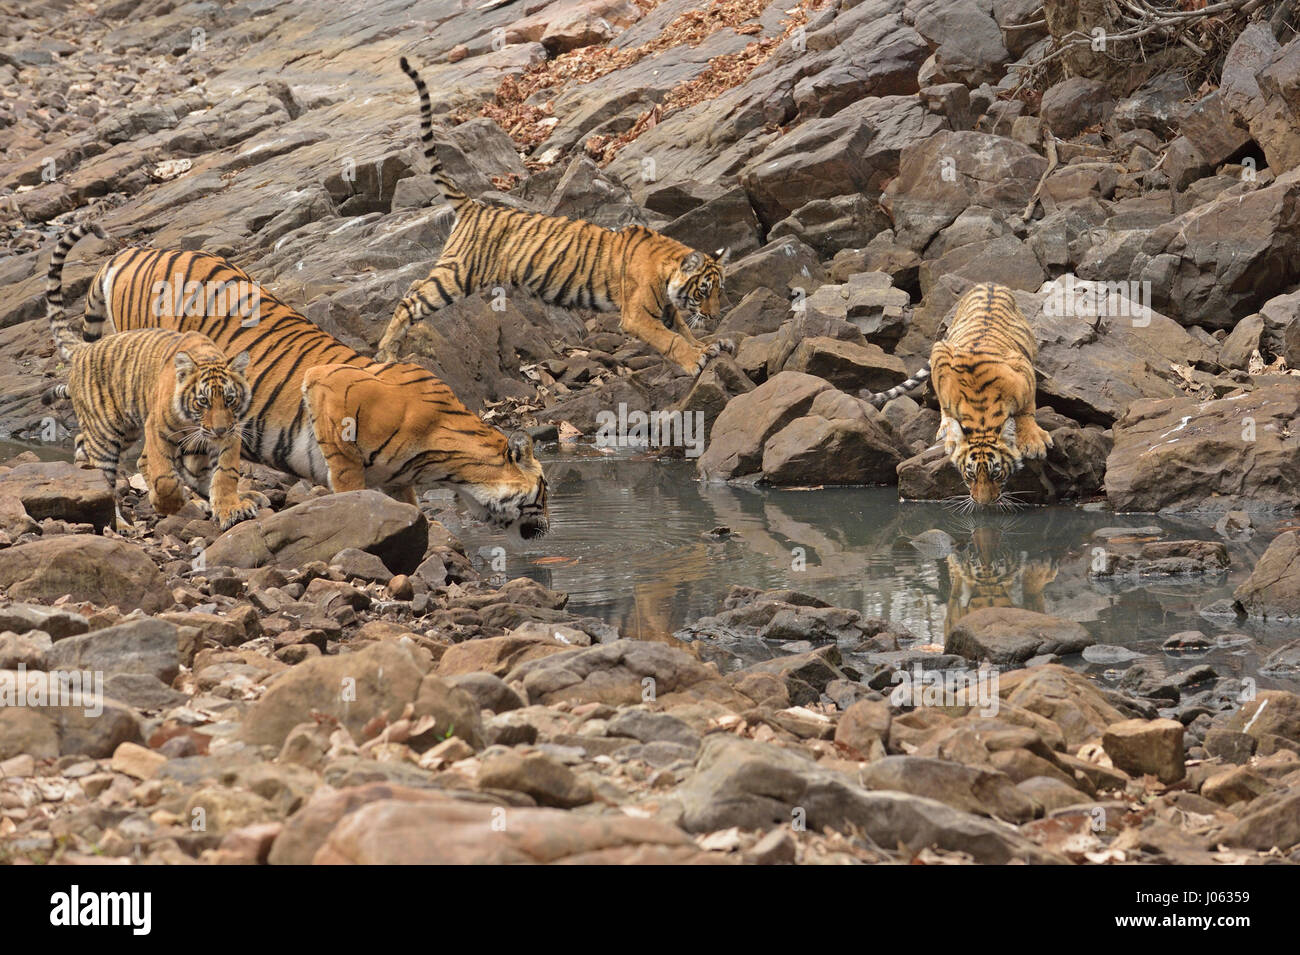 A wild tiger, mother with her young cubs, drinking water from a small pond in Ranthambhore national park, India Stock Photo